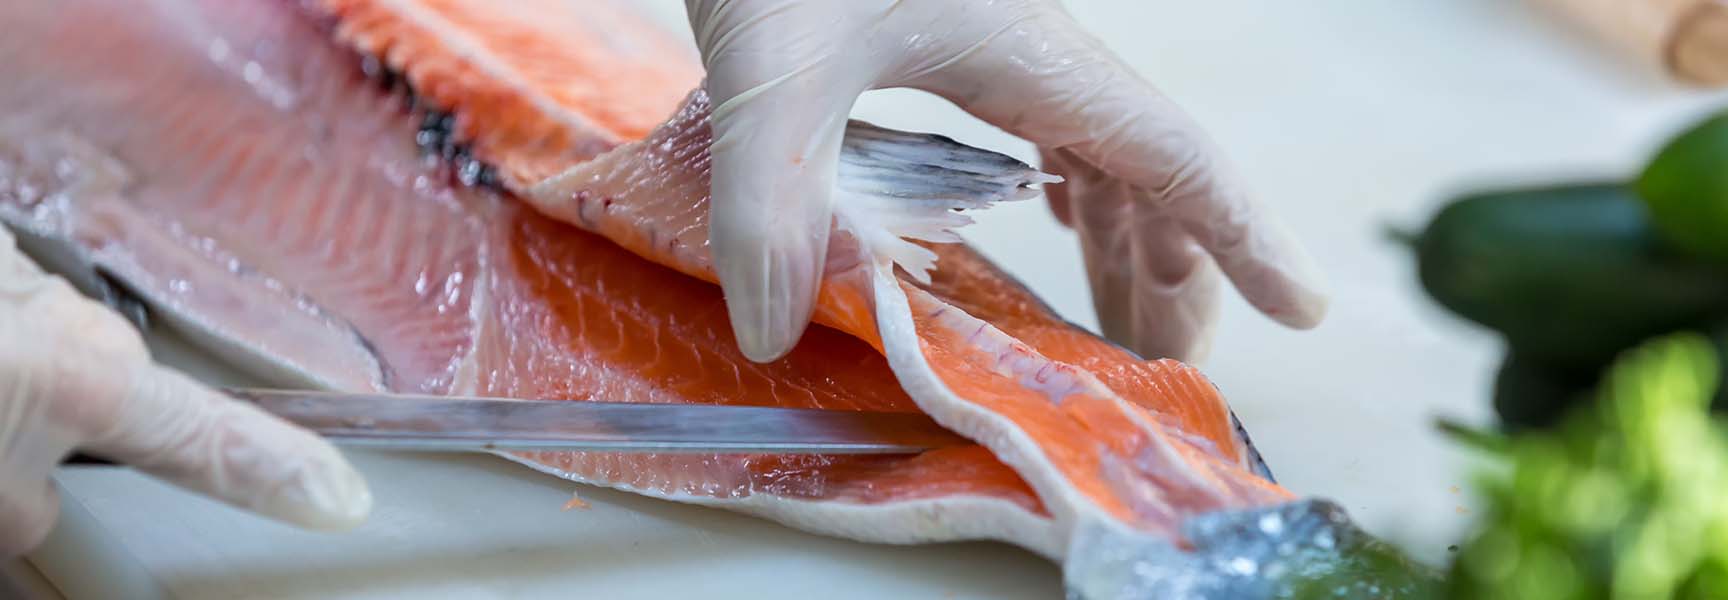 A skilled sushi chef expertly fillets a fish showcasing their precision and attention to detail.